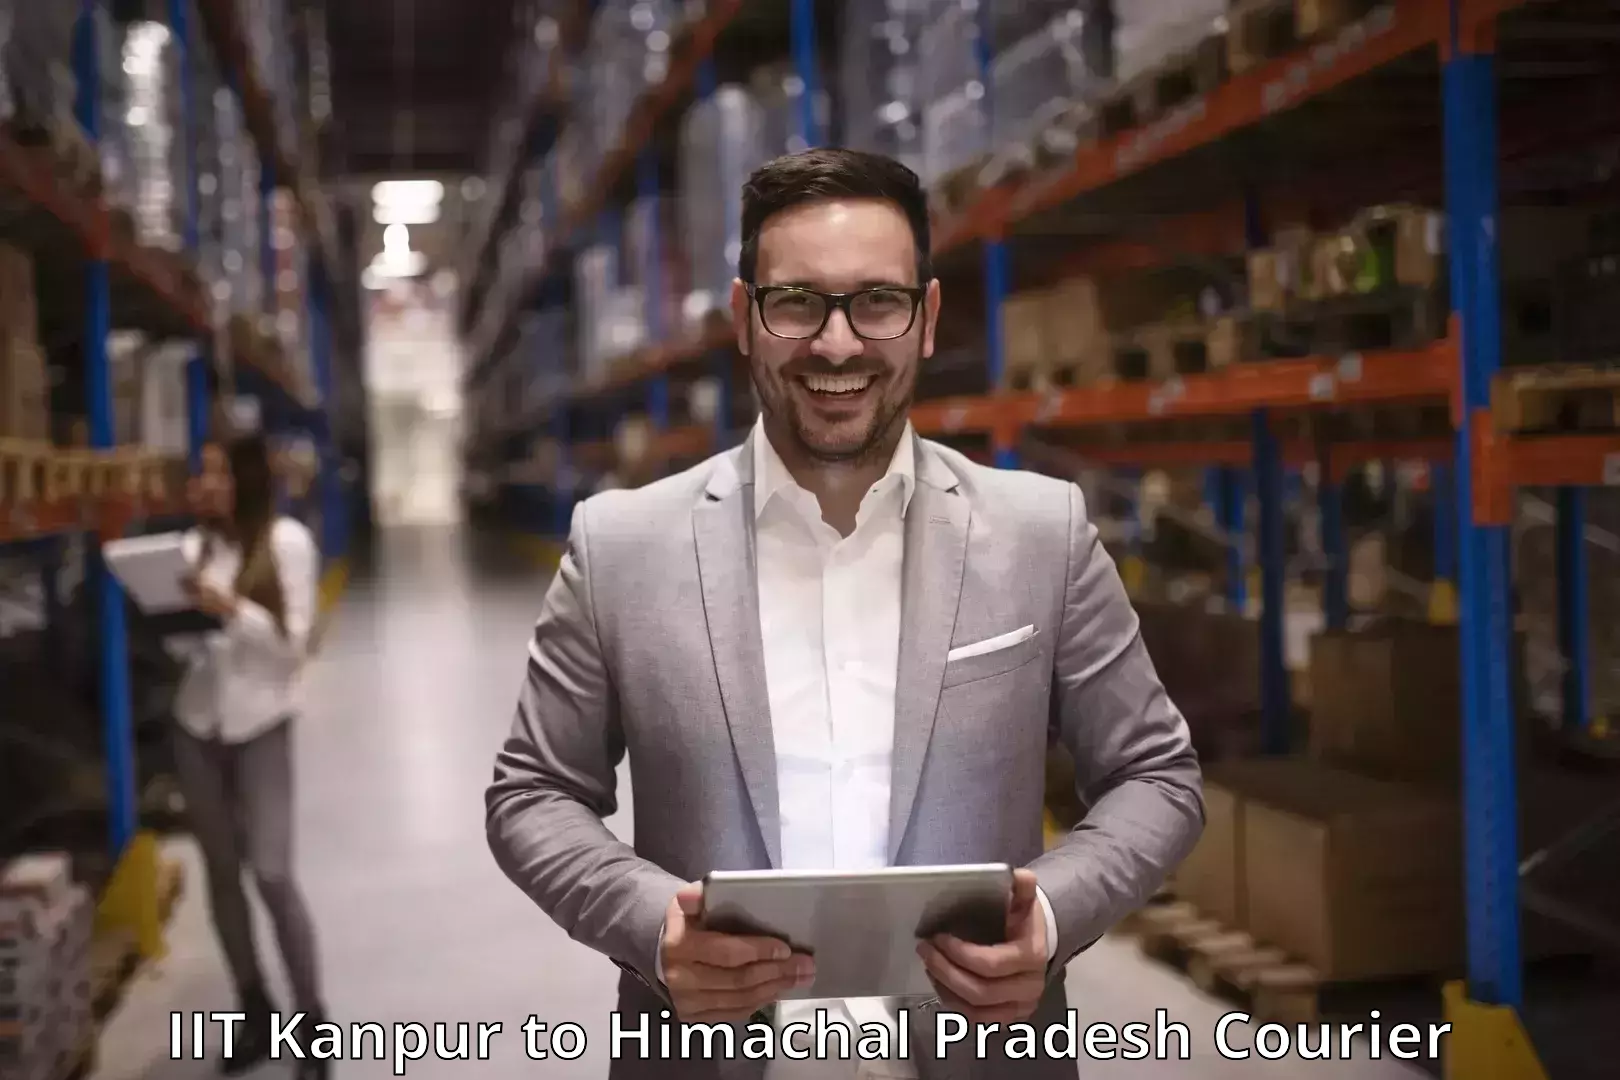 Professional courier services IIT Kanpur to Himachal Pradesh